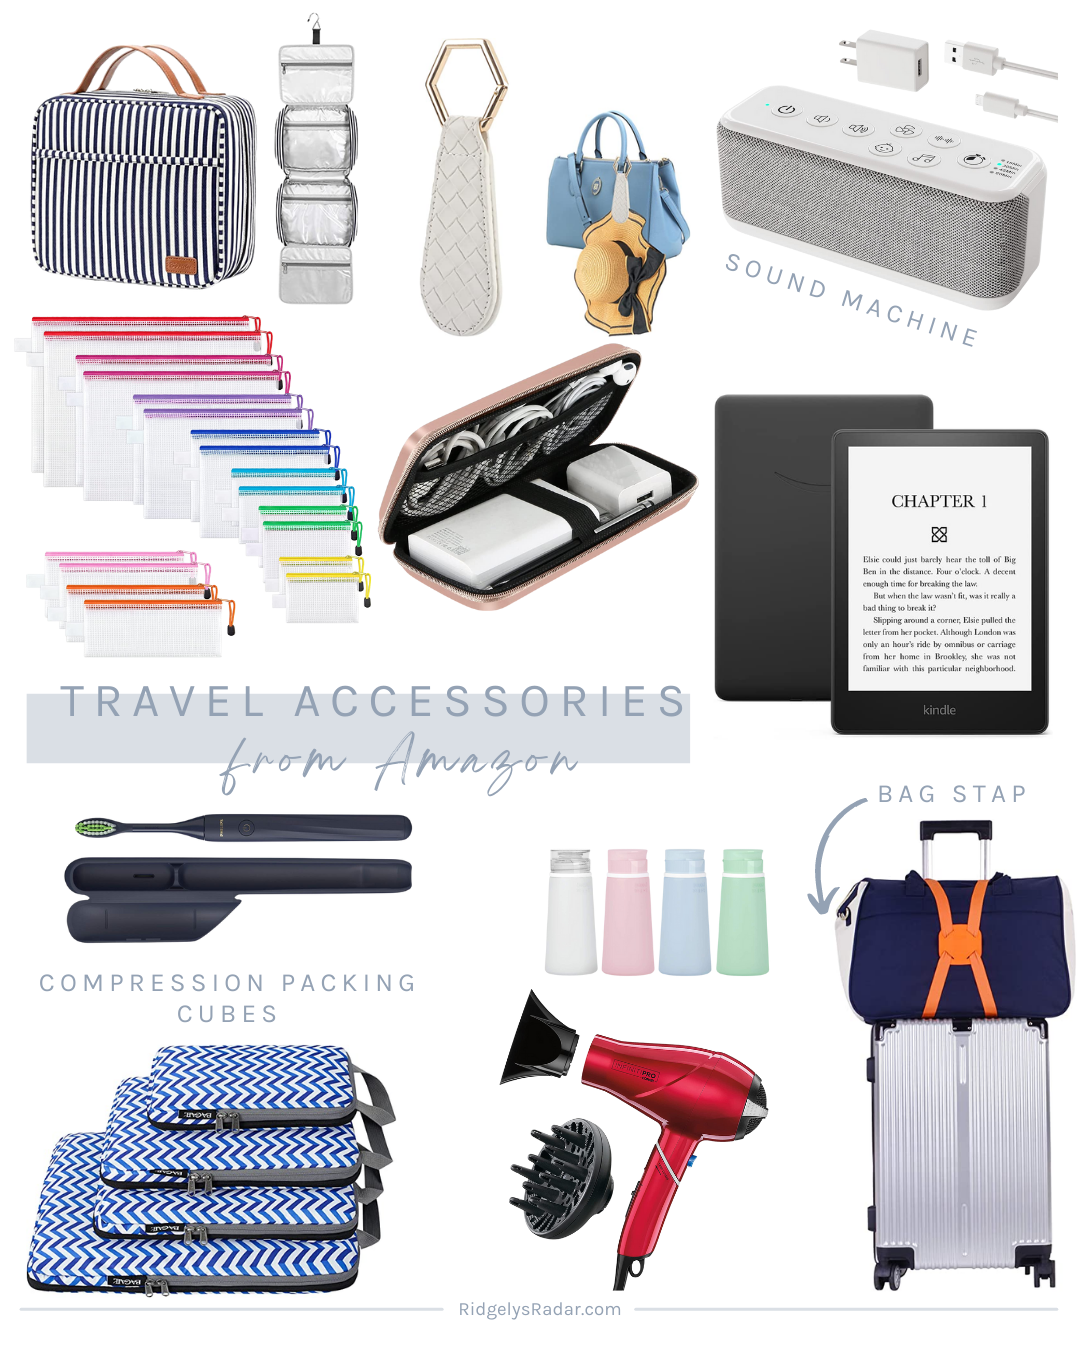 Travel light with these budget friendly travel accessories from Amazon that will fit in your carry on luggage.